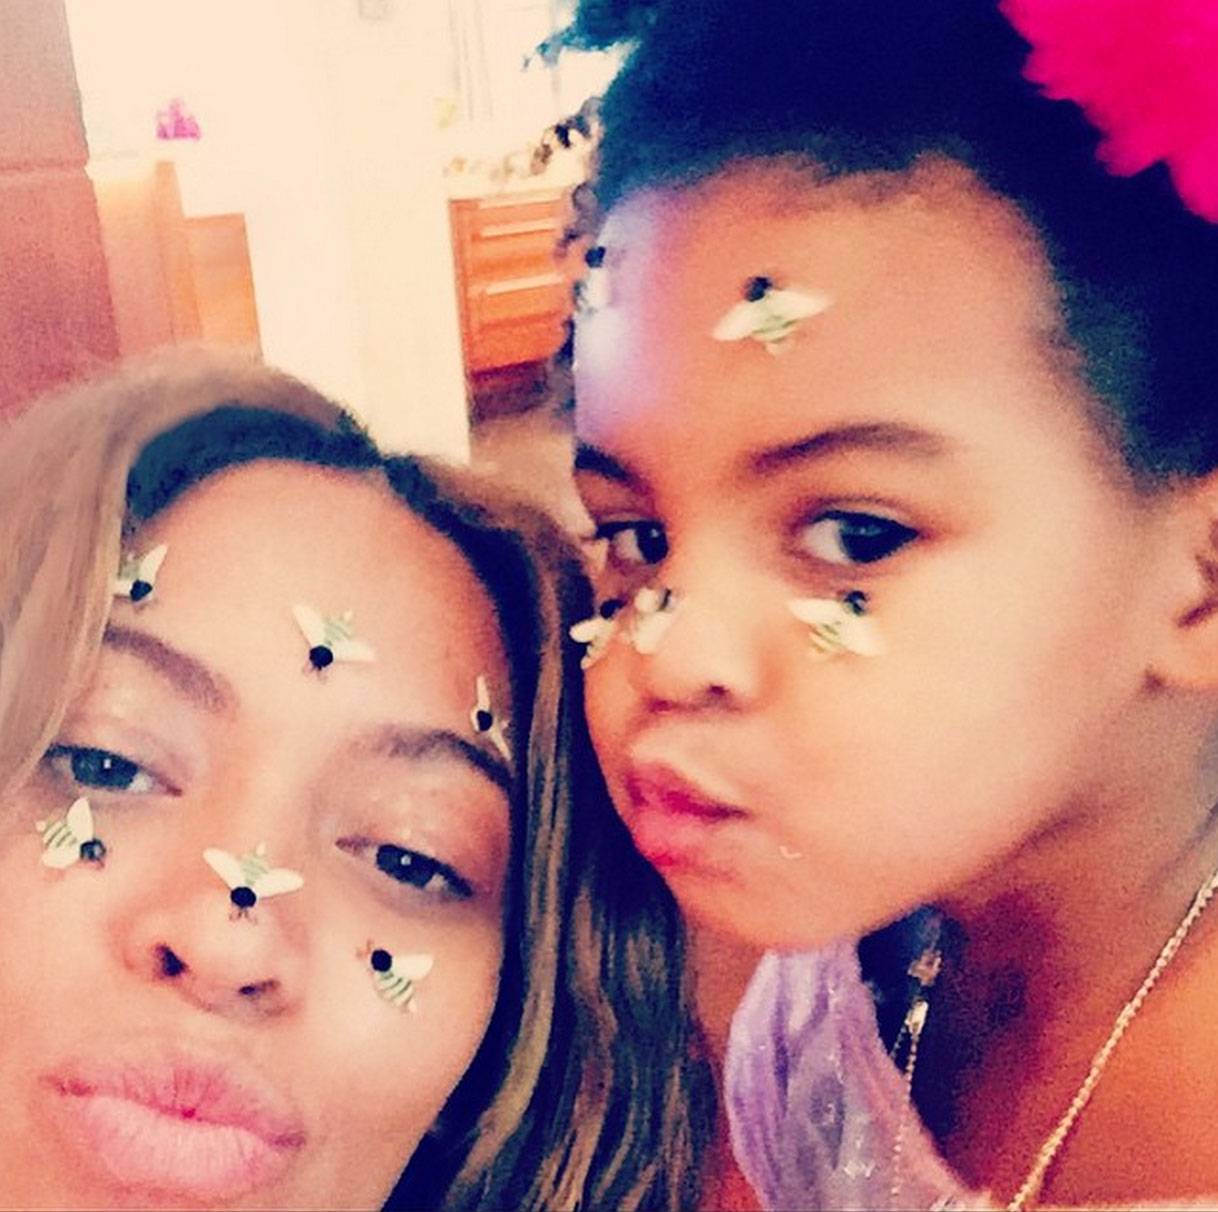 Blue Ivy Starts Early&nbsp; - Cutie pie Blue Ivy was spotted leaving gymnastics class with her mommy last week. Looks like she's starting early. You know those Knowles-Carters don't play when it comes to honing talent!&nbsp;   (Photo: Beyonce via Instagram)